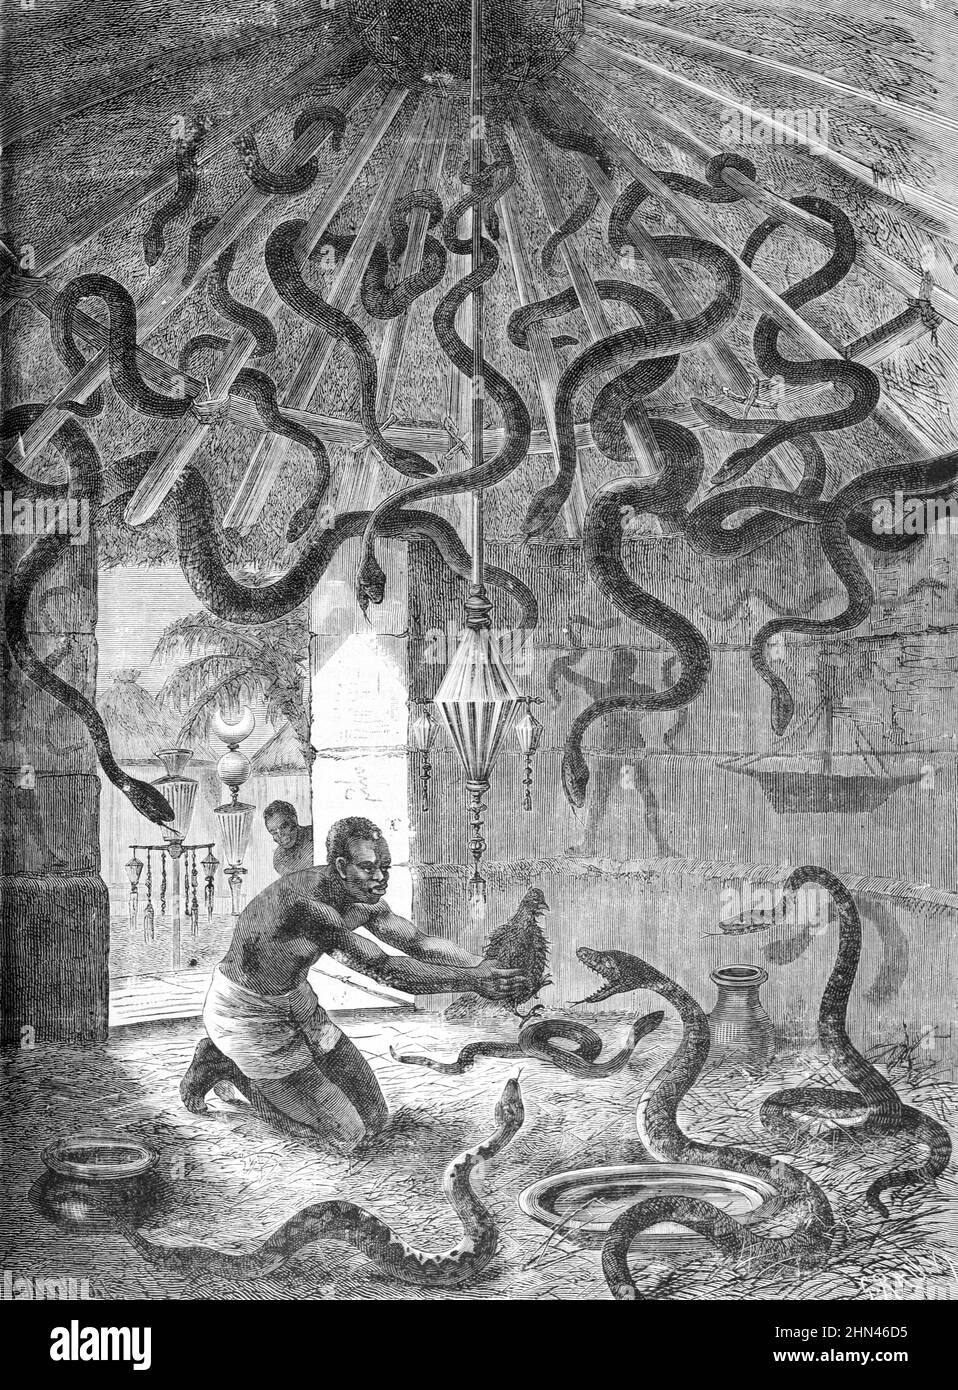 Snake Charmer, Witch Doctor or Sorcerer in Dahomey now Benin Africa. Vintage Illustration or Engraving 1881 Stock Photo